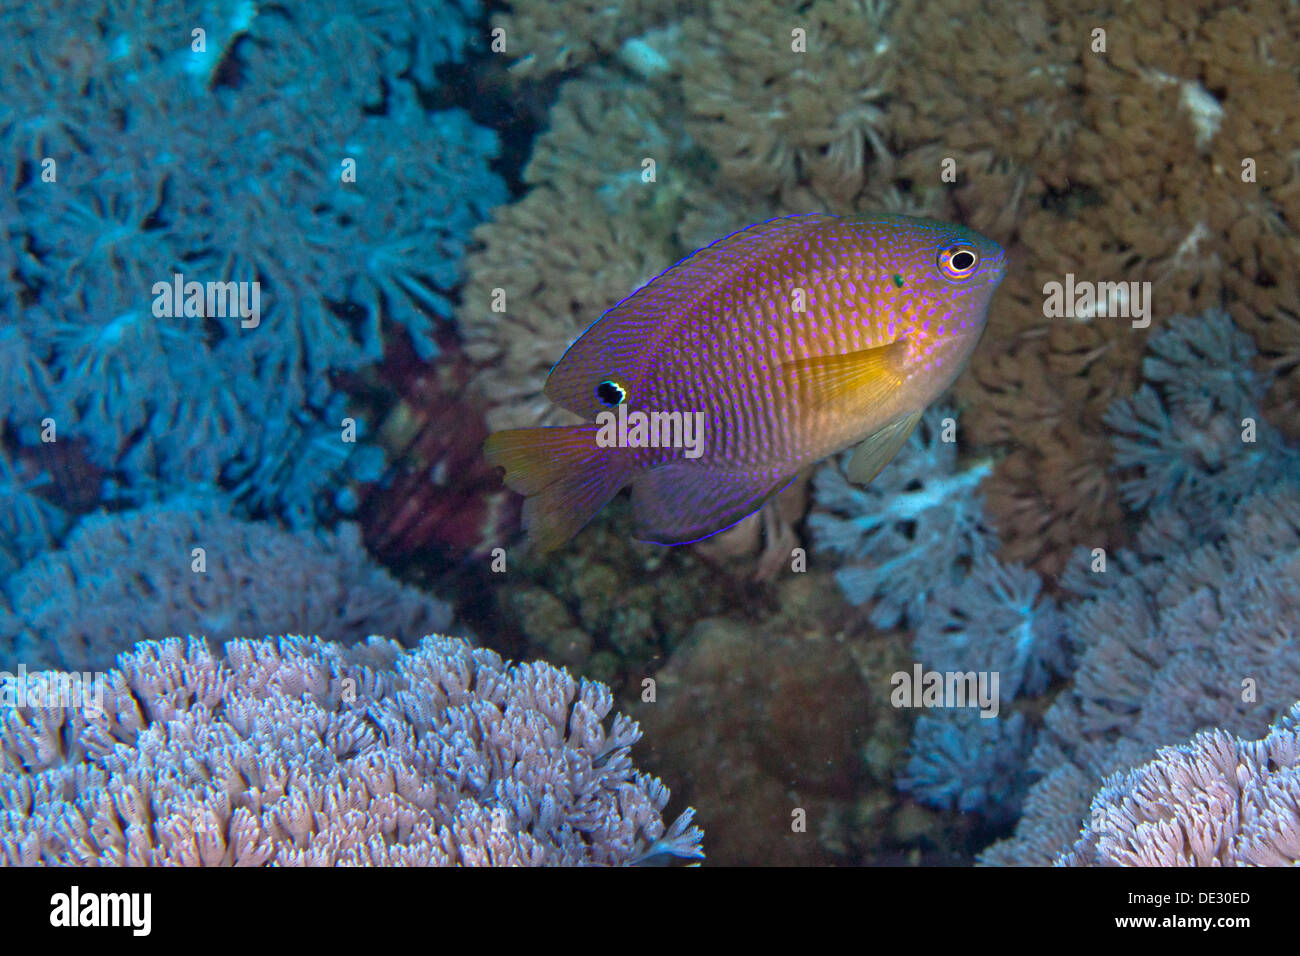 Purple and yellow Princess damselfish with blue-green soft coral background. Stock Photo